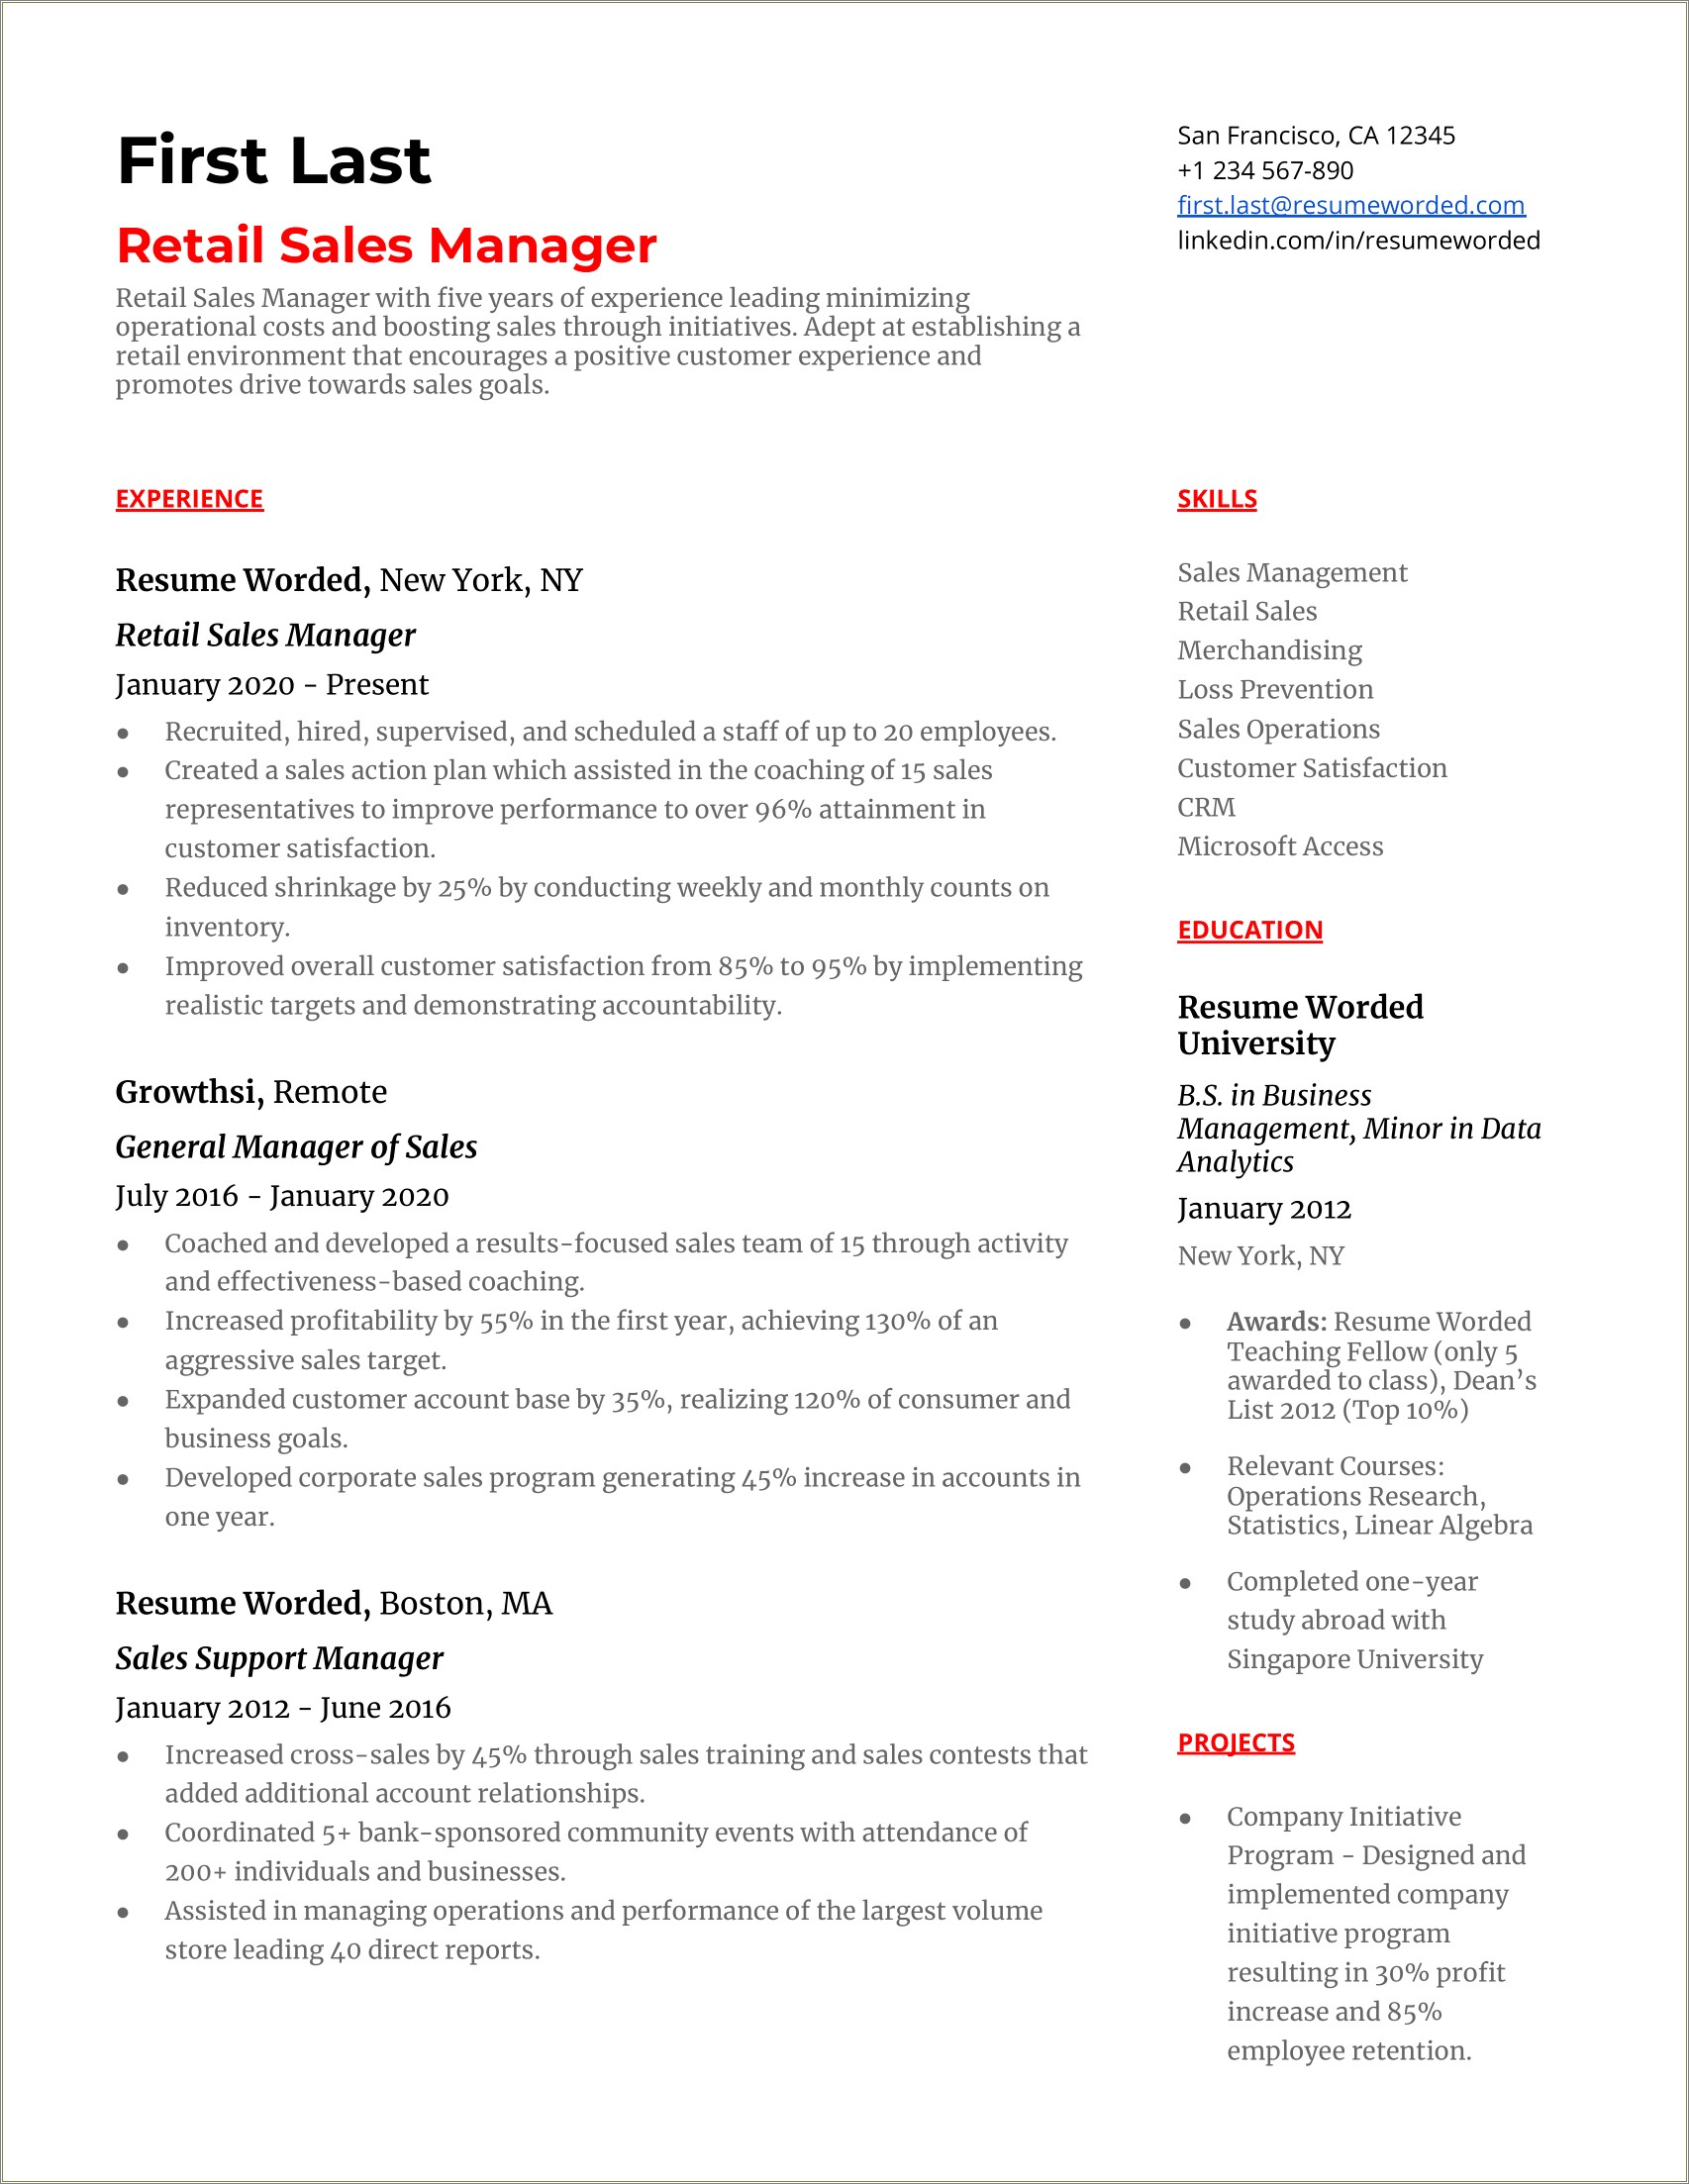 Professional Resume Summary Examples For Account Sales Manager